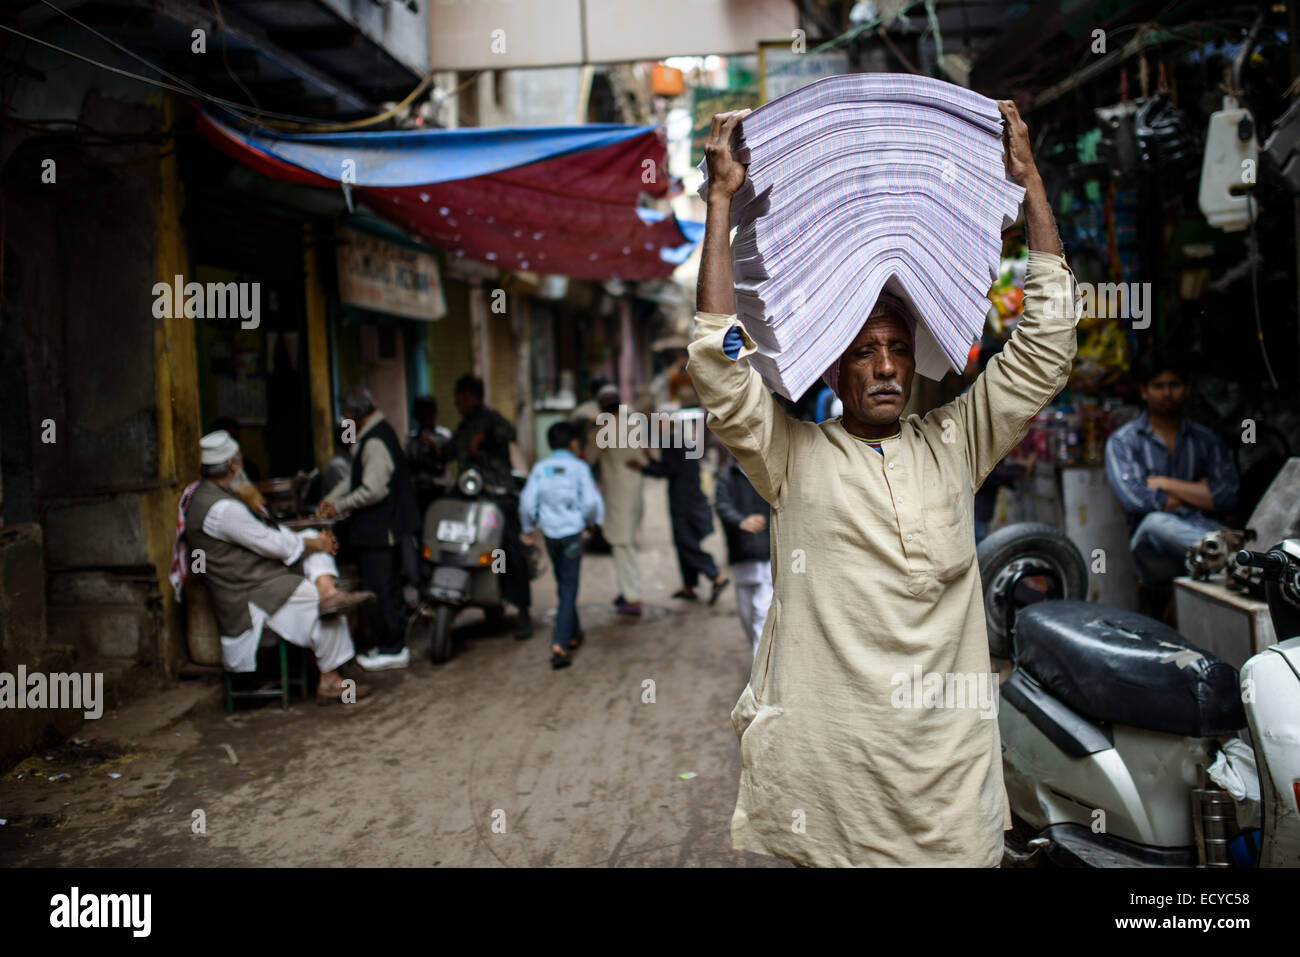 Man carrying piles of paper, Old Delhi, India Stock Photo